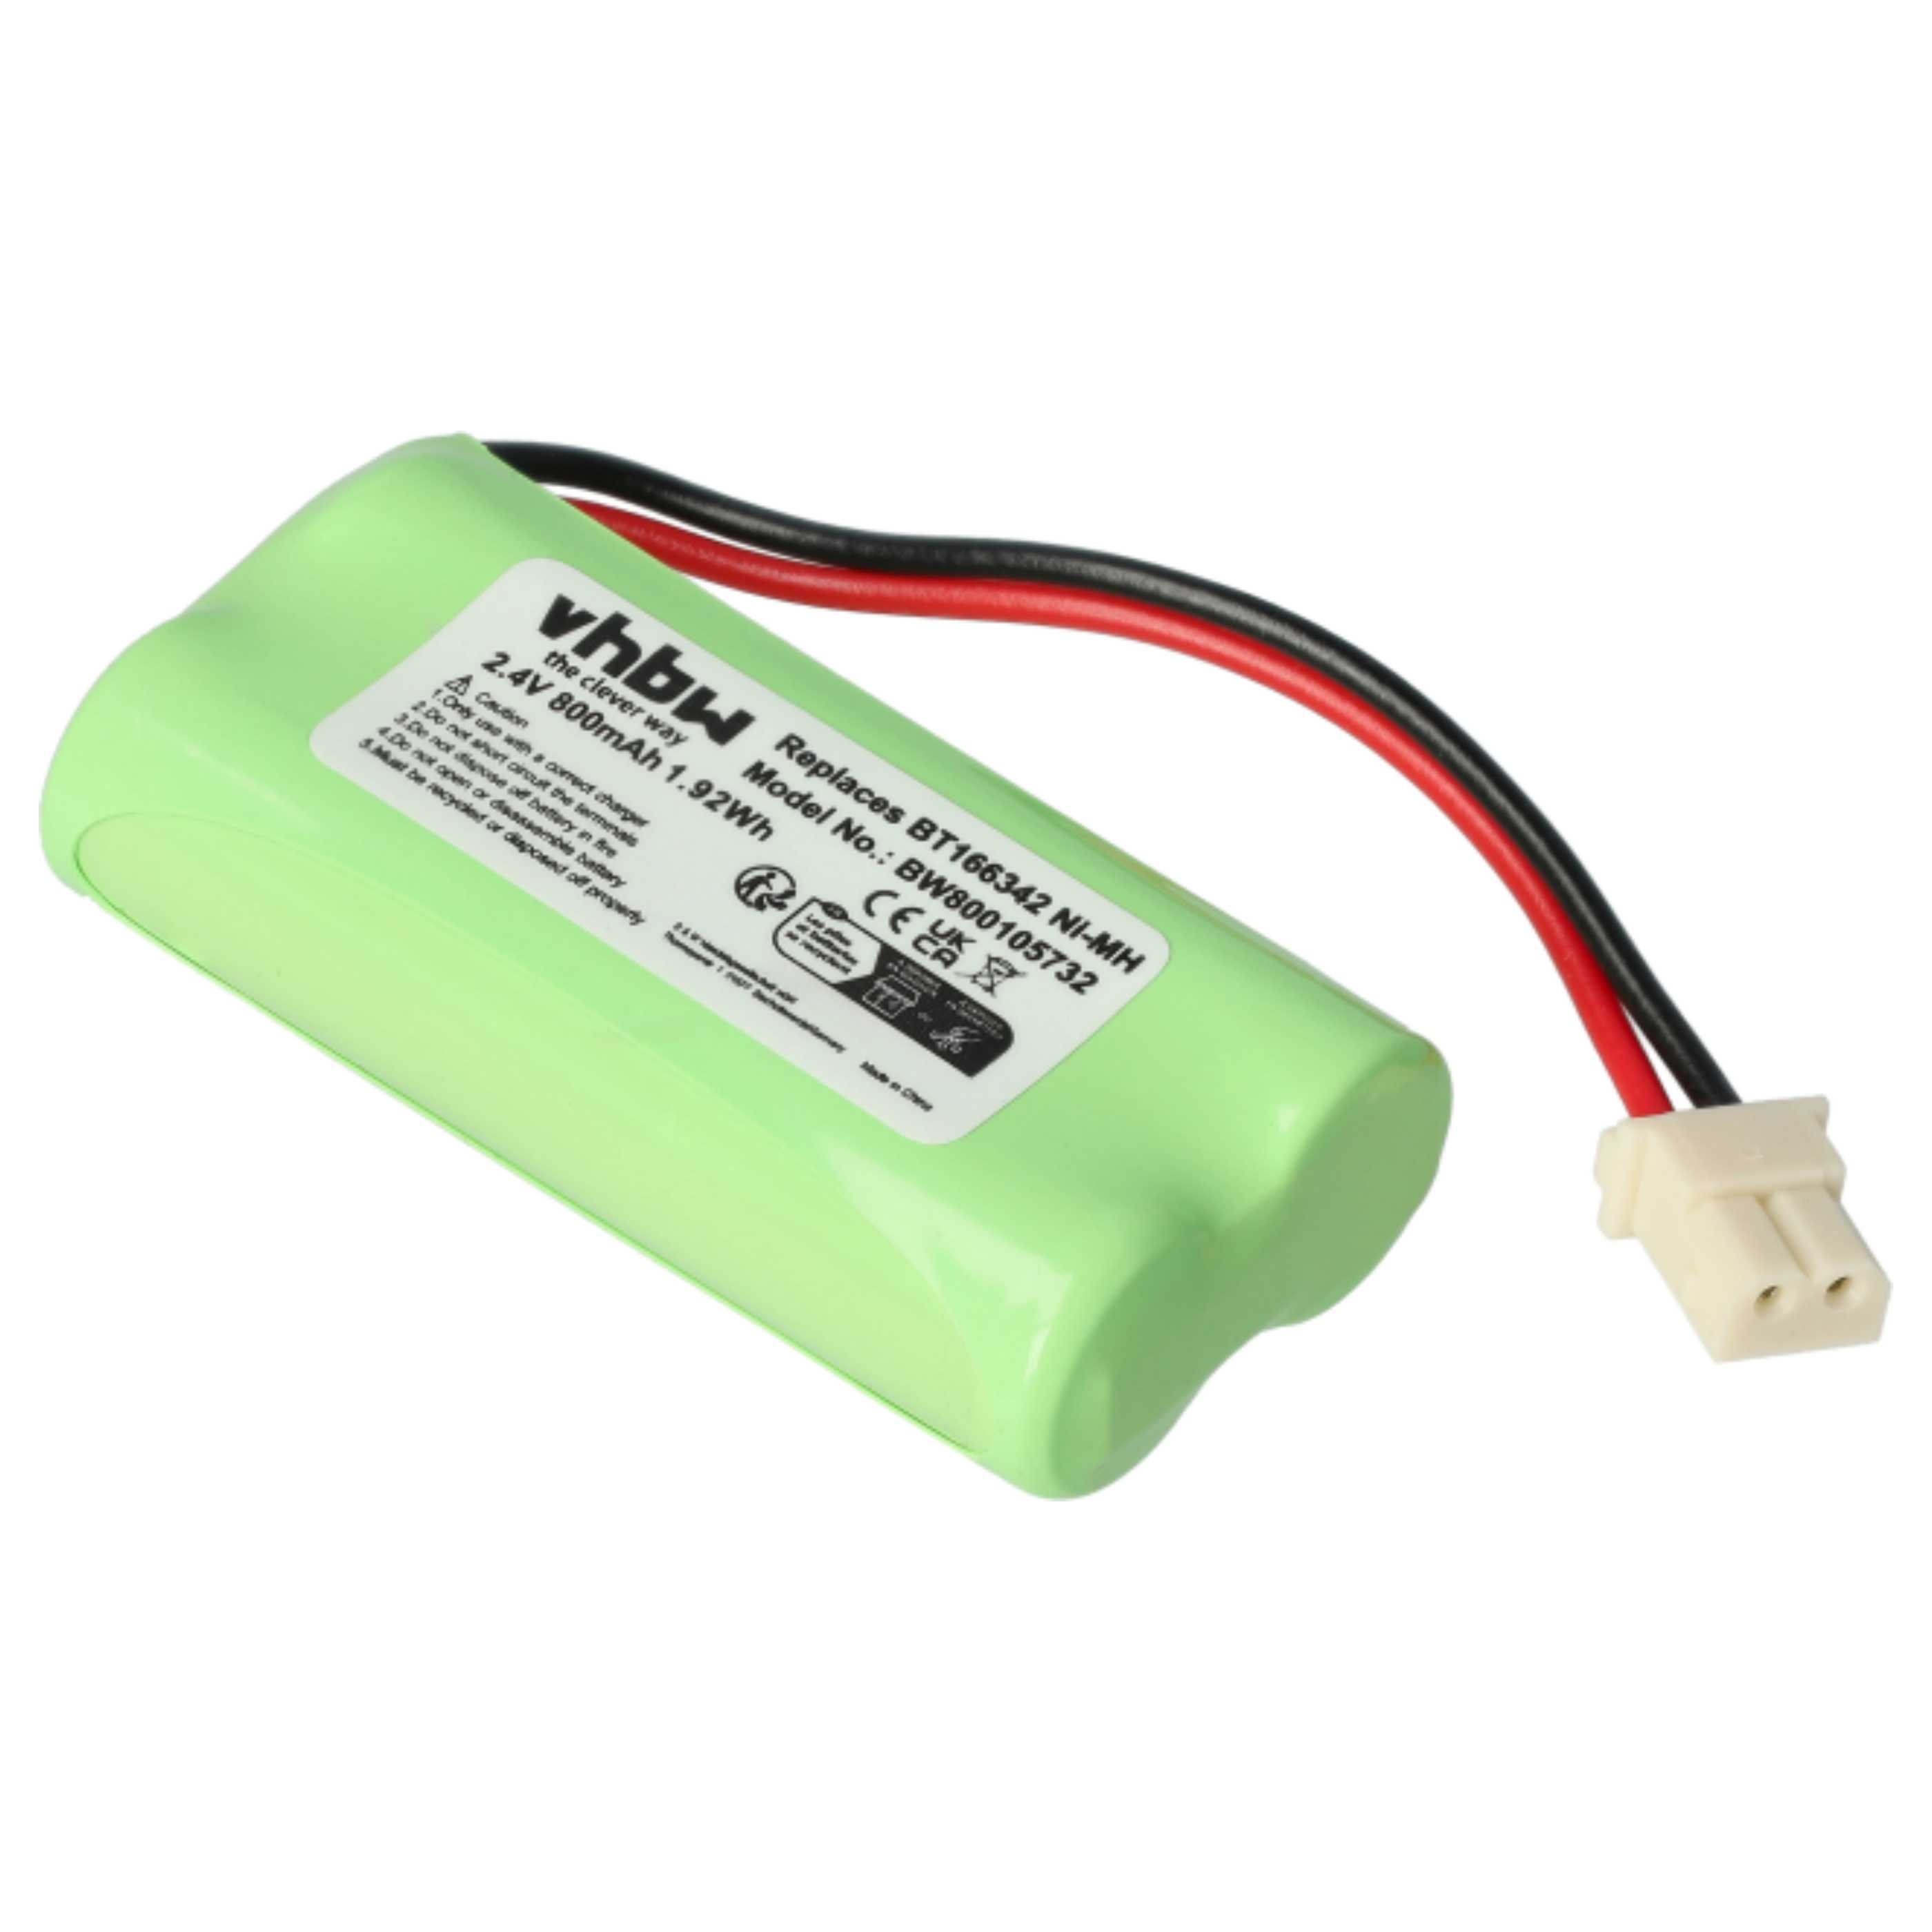 Baby Monitor Battery Replacement for V-Tech BT166342, 43AAA70PS2, BT266342 - 800mAh 2.4V NiMH